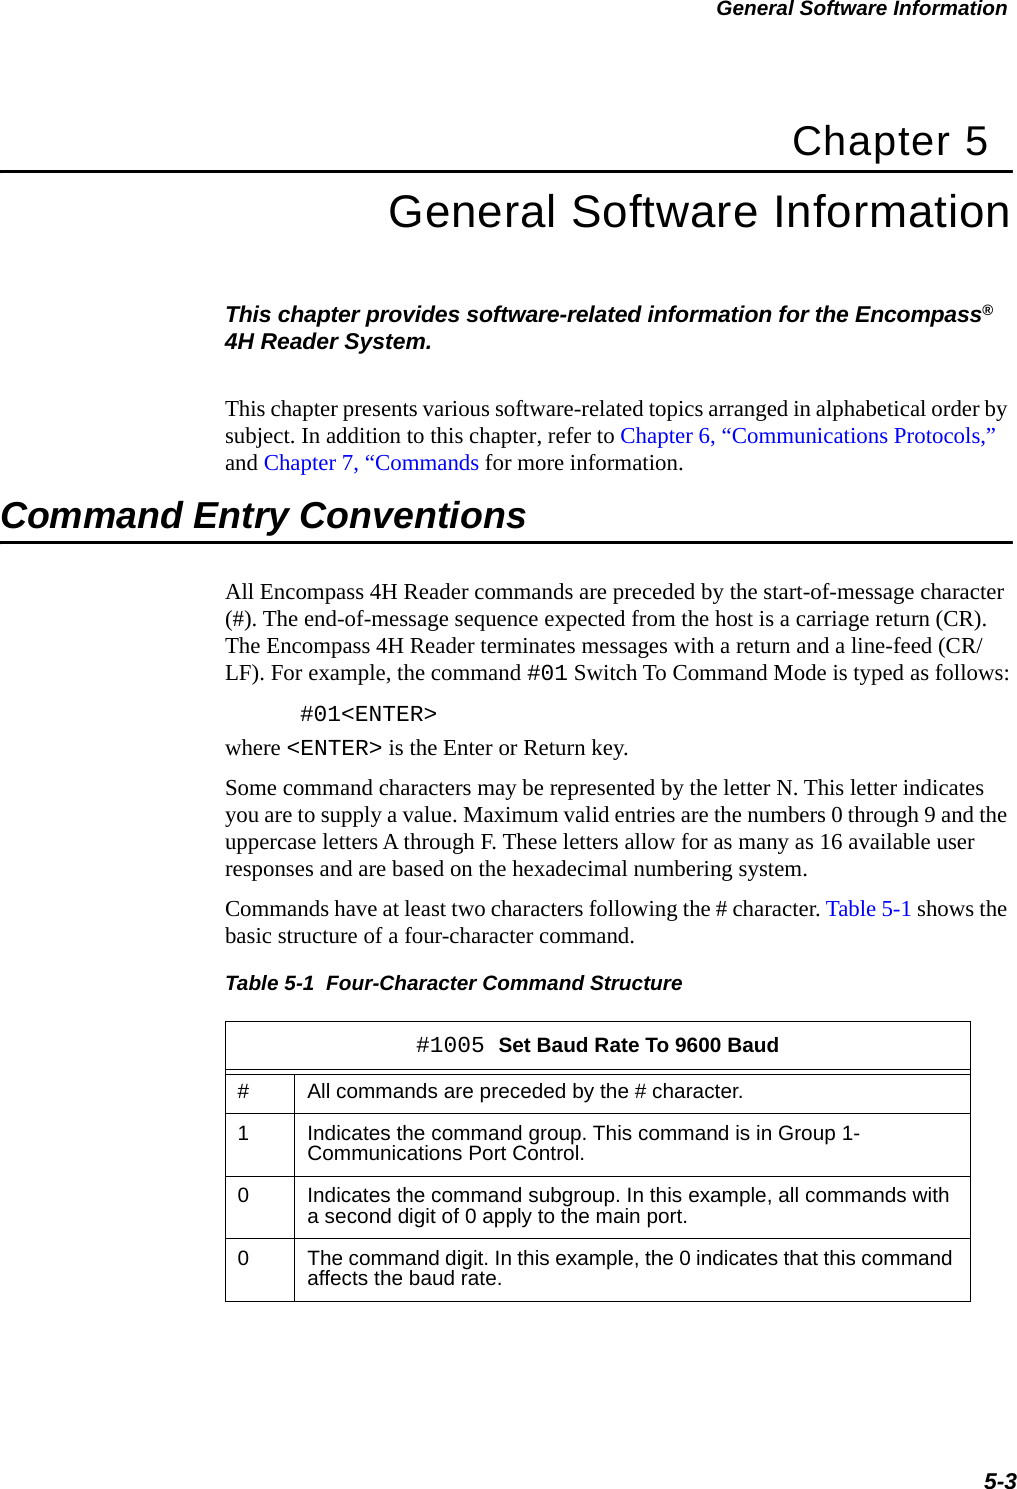 General Software Information5-3Chapter 5General Software InformationThis chapter provides software-related information for the Encompass® 4H Reader System. This chapter presents various software-related topics arranged in alphabetical order by subject. In addition to this chapter, refer to Chapter 6, “Communications Protocols,” and Chapter 7, “Commands for more information.Command Entry ConventionsAll Encompass 4H Reader commands are preceded by the start-of-message character (#). The end-of-message sequence expected from the host is a carriage return (CR). The Encompass 4H Reader terminates messages with a return and a line-feed (CR/LF). For example, the command #01 Switch To Command Mode is typed as follows:#01&lt;ENTER&gt;where &lt;ENTER&gt; is the Enter or Return key.Some command characters may be represented by the letter N. This letter indicates you are to supply a value. Maximum valid entries are the numbers 0 through 9 and the uppercase letters A through F. These letters allow for as many as 16 available user responses and are based on the hexadecimal numbering system. Commands have at least two characters following the # character. Table 5-1 shows the basic structure of a four-character command.Table 5-1  Four-Character Command Structure #1005 Set Baud Rate To 9600 Baud#All commands are preceded by the # character.1Indicates the command group. This command is in Group 1- Communications Port Control.0Indicates the command subgroup. In this example, all commands with a second digit of 0 apply to the main port.0The command digit. In this example, the 0 indicates that this command affects the baud rate.